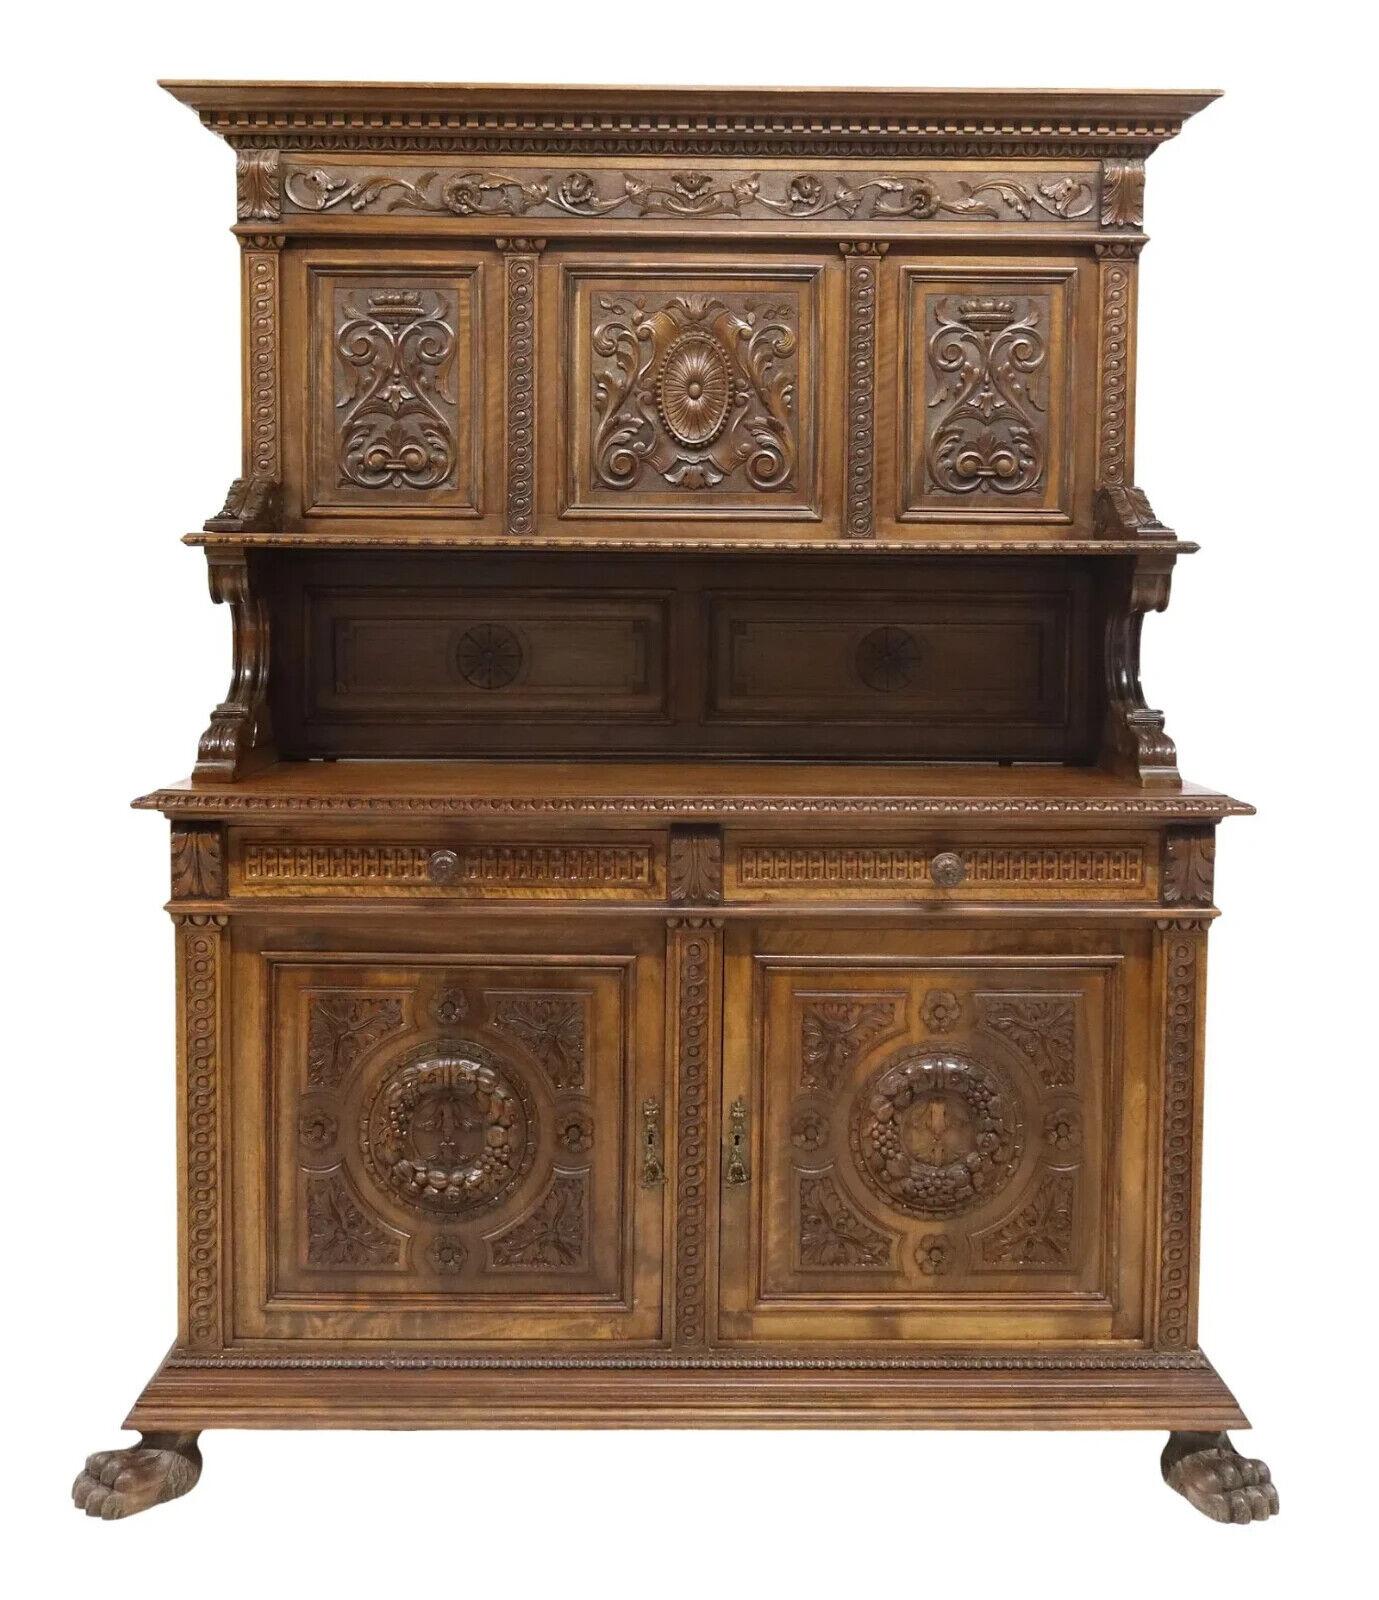 Gorgeous Antique Sideboard, Italian Renaissance Revival, Carved Walnut, Early 1900s, 20th Century!

This stunning antique sideboard is a true masterpiece of Italian Renaissance Revival style. Crafted from intricately carved walnut, this piece is